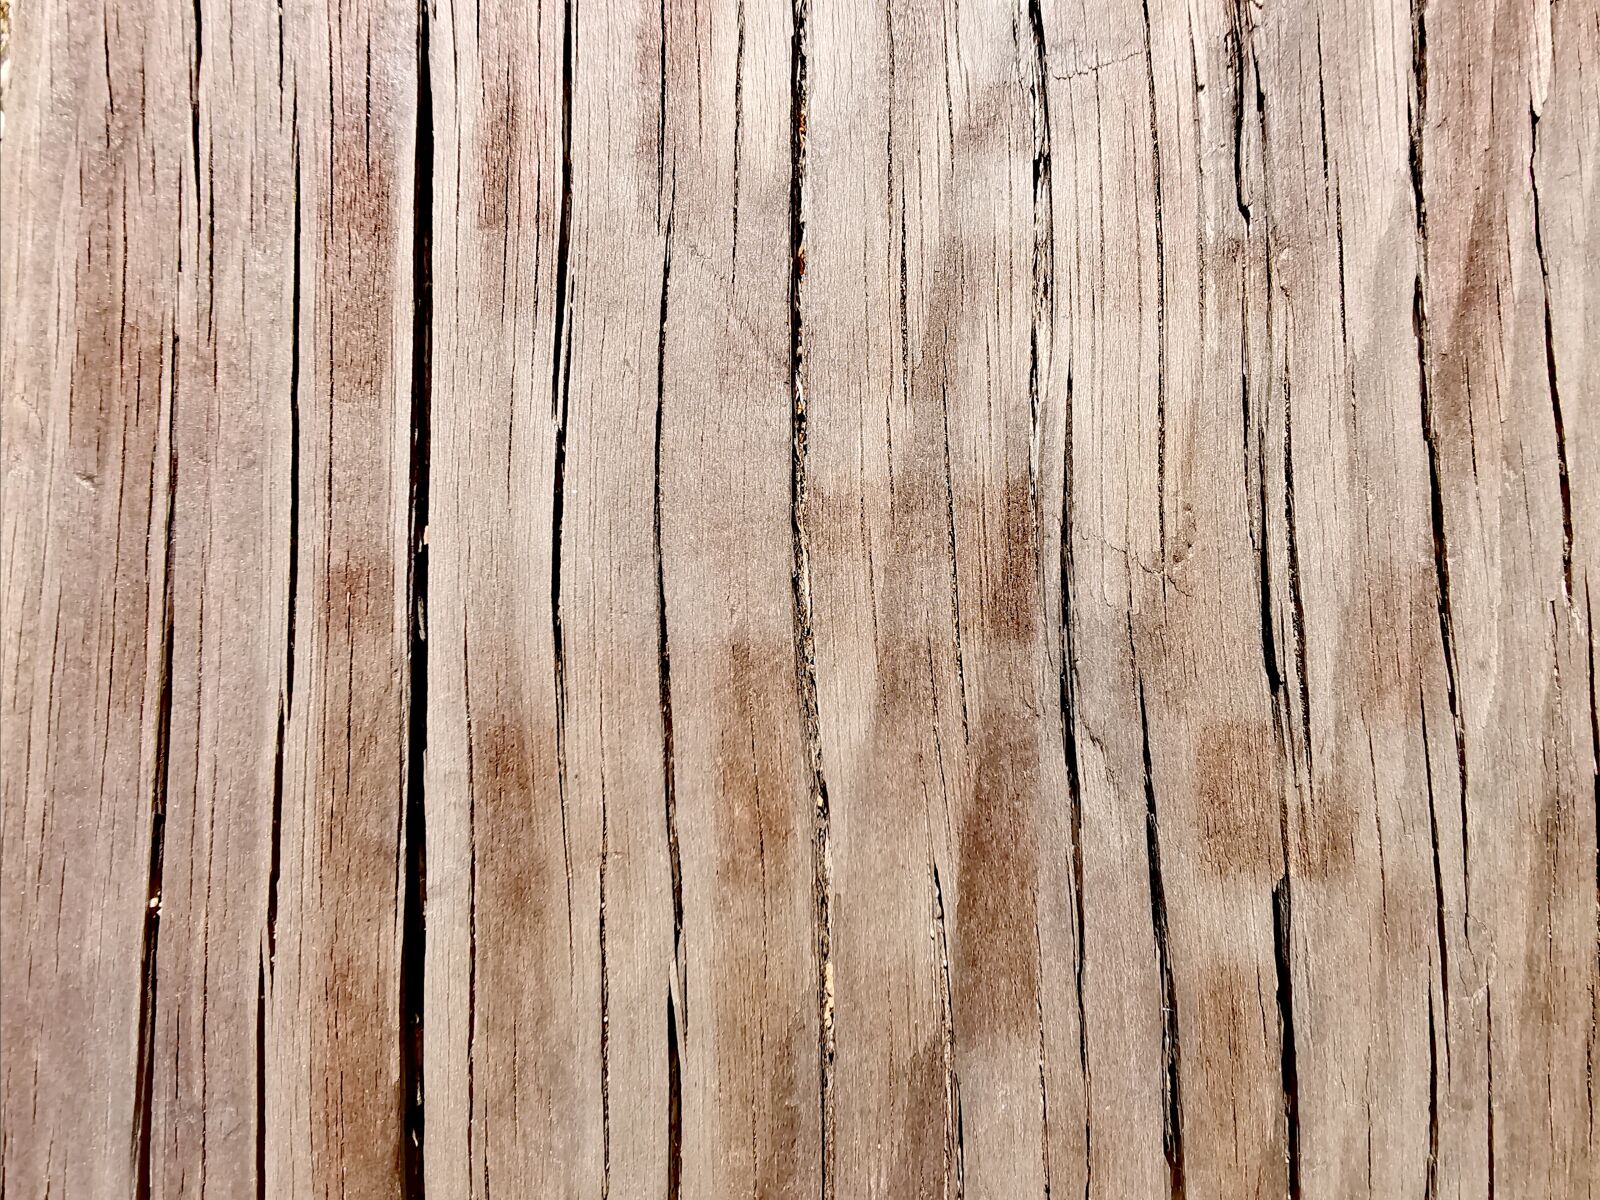 HUAWEI LYA-L29 sample photo. Wood, texture, structure photography